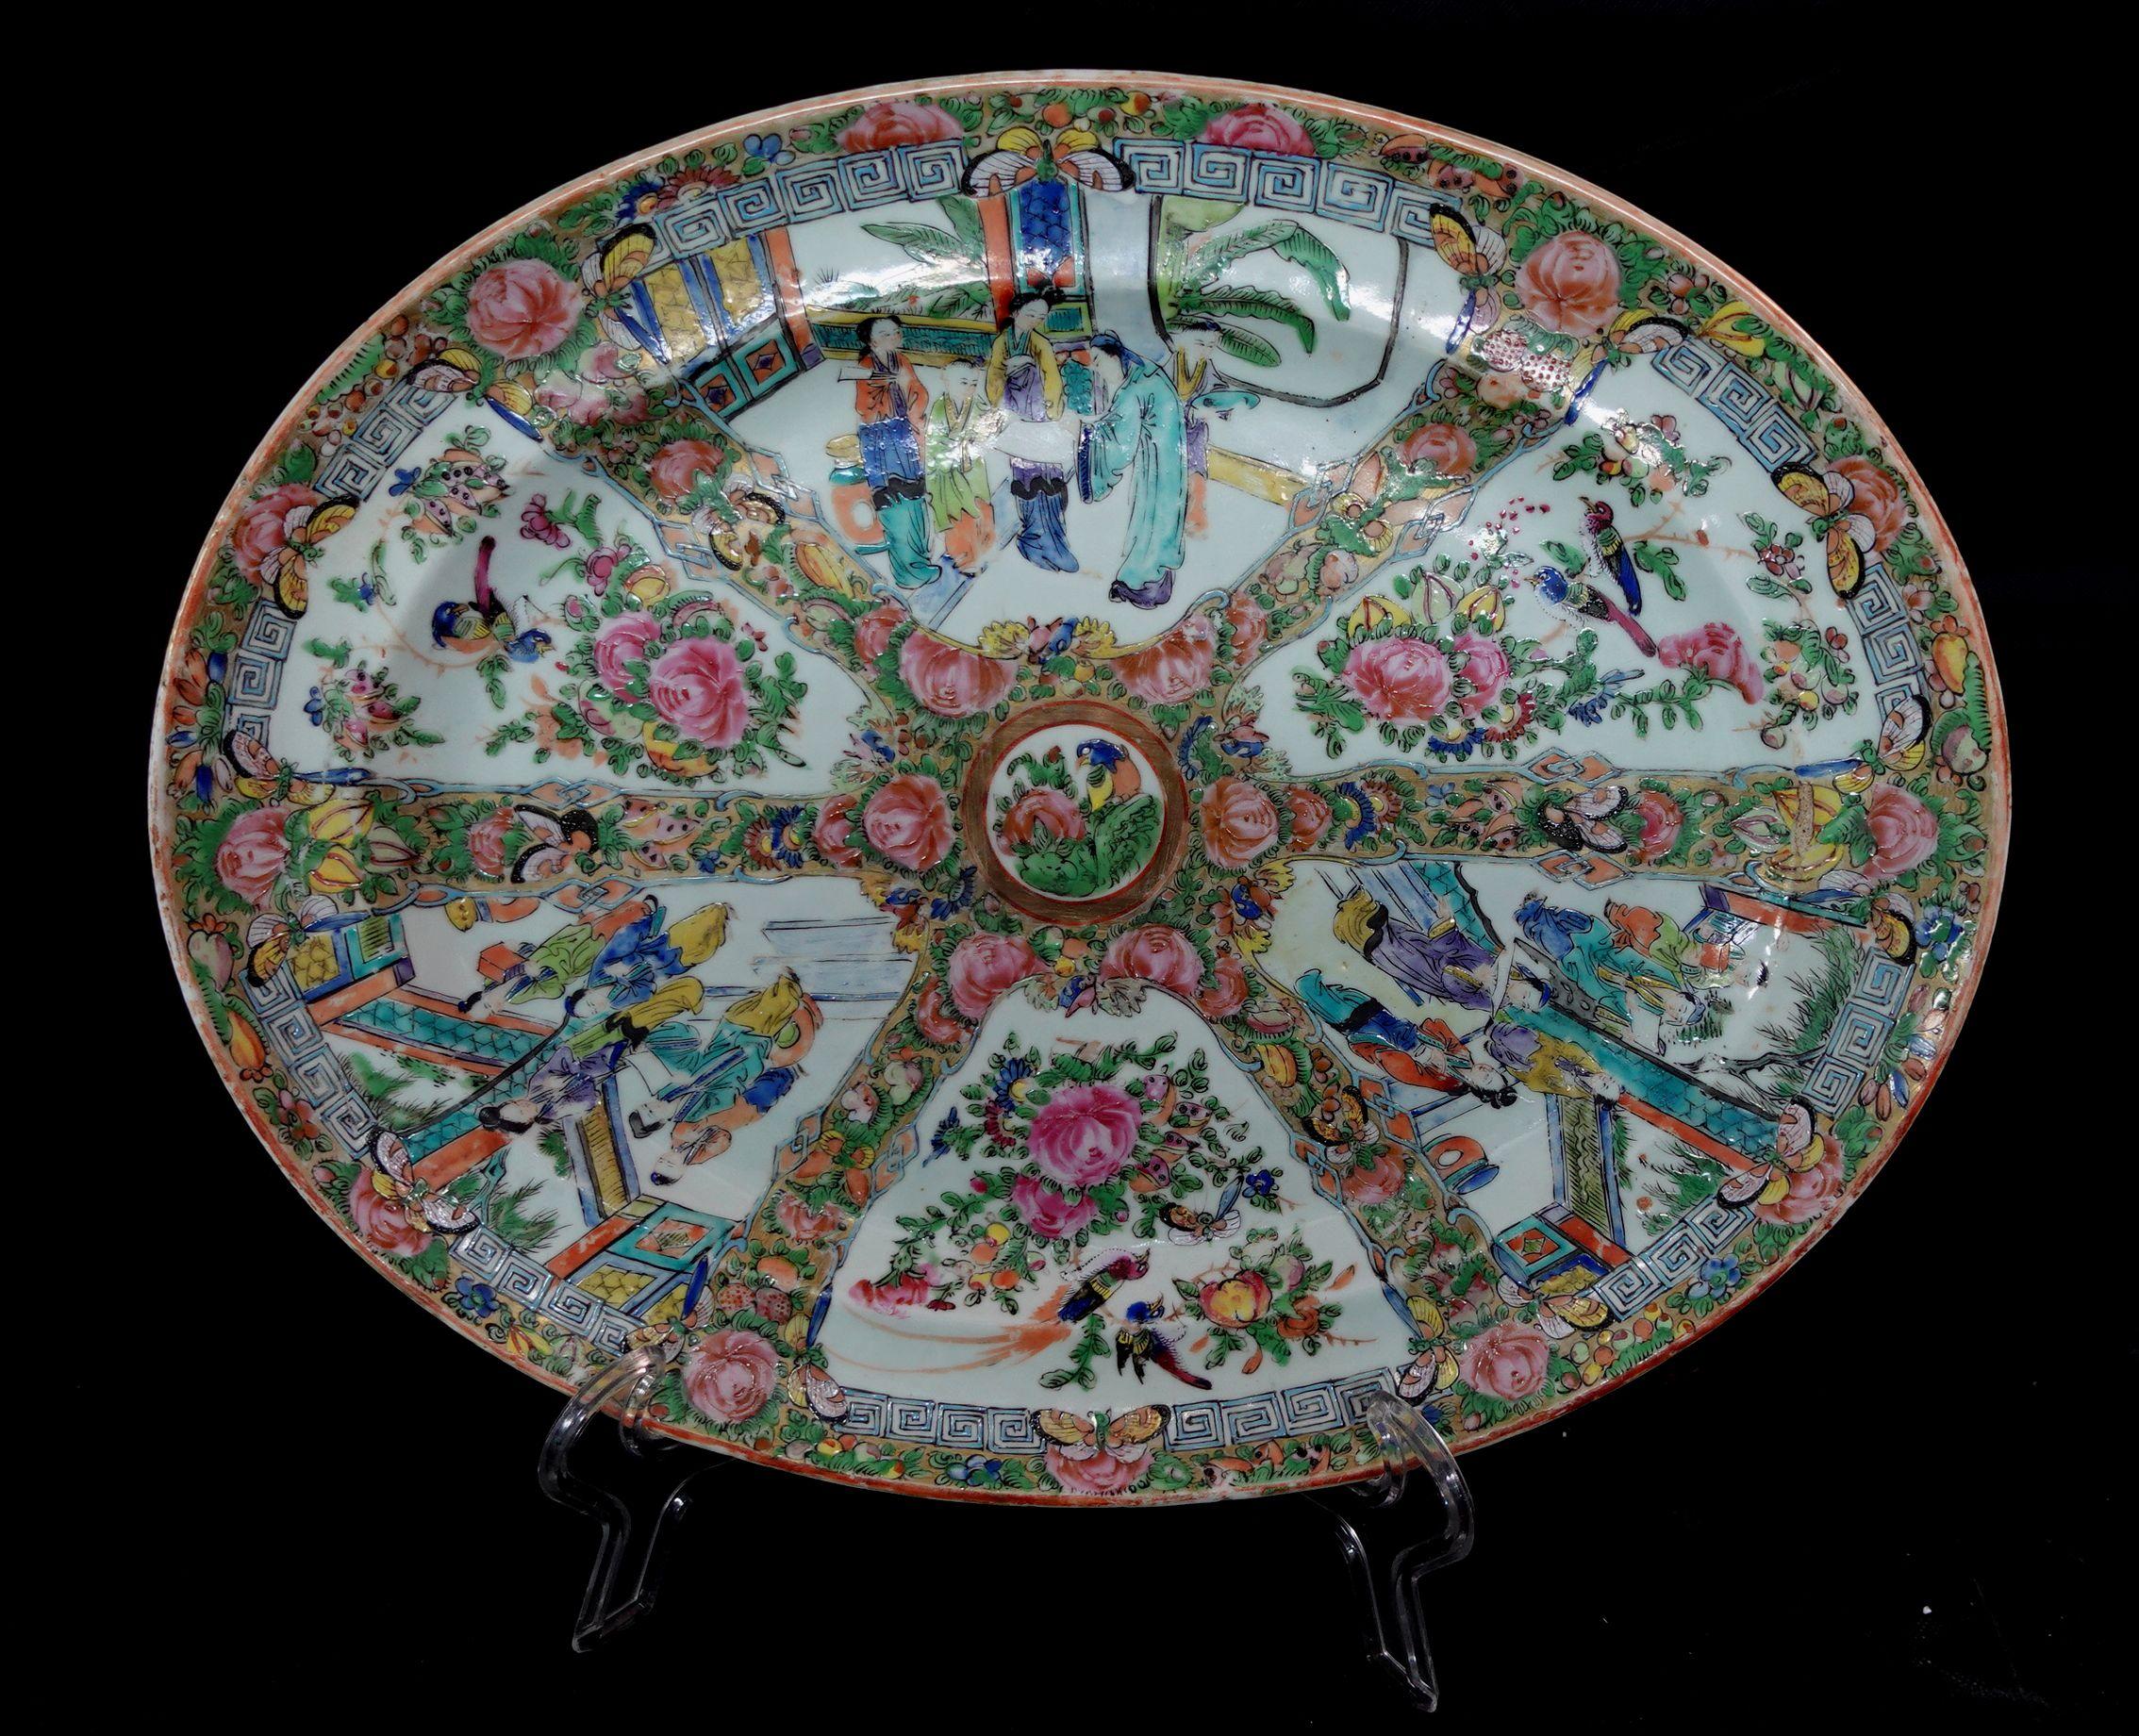 Oval Famille Rose Export Porcelain Platter depicting figures, floral and birds, early 19th Century.
 